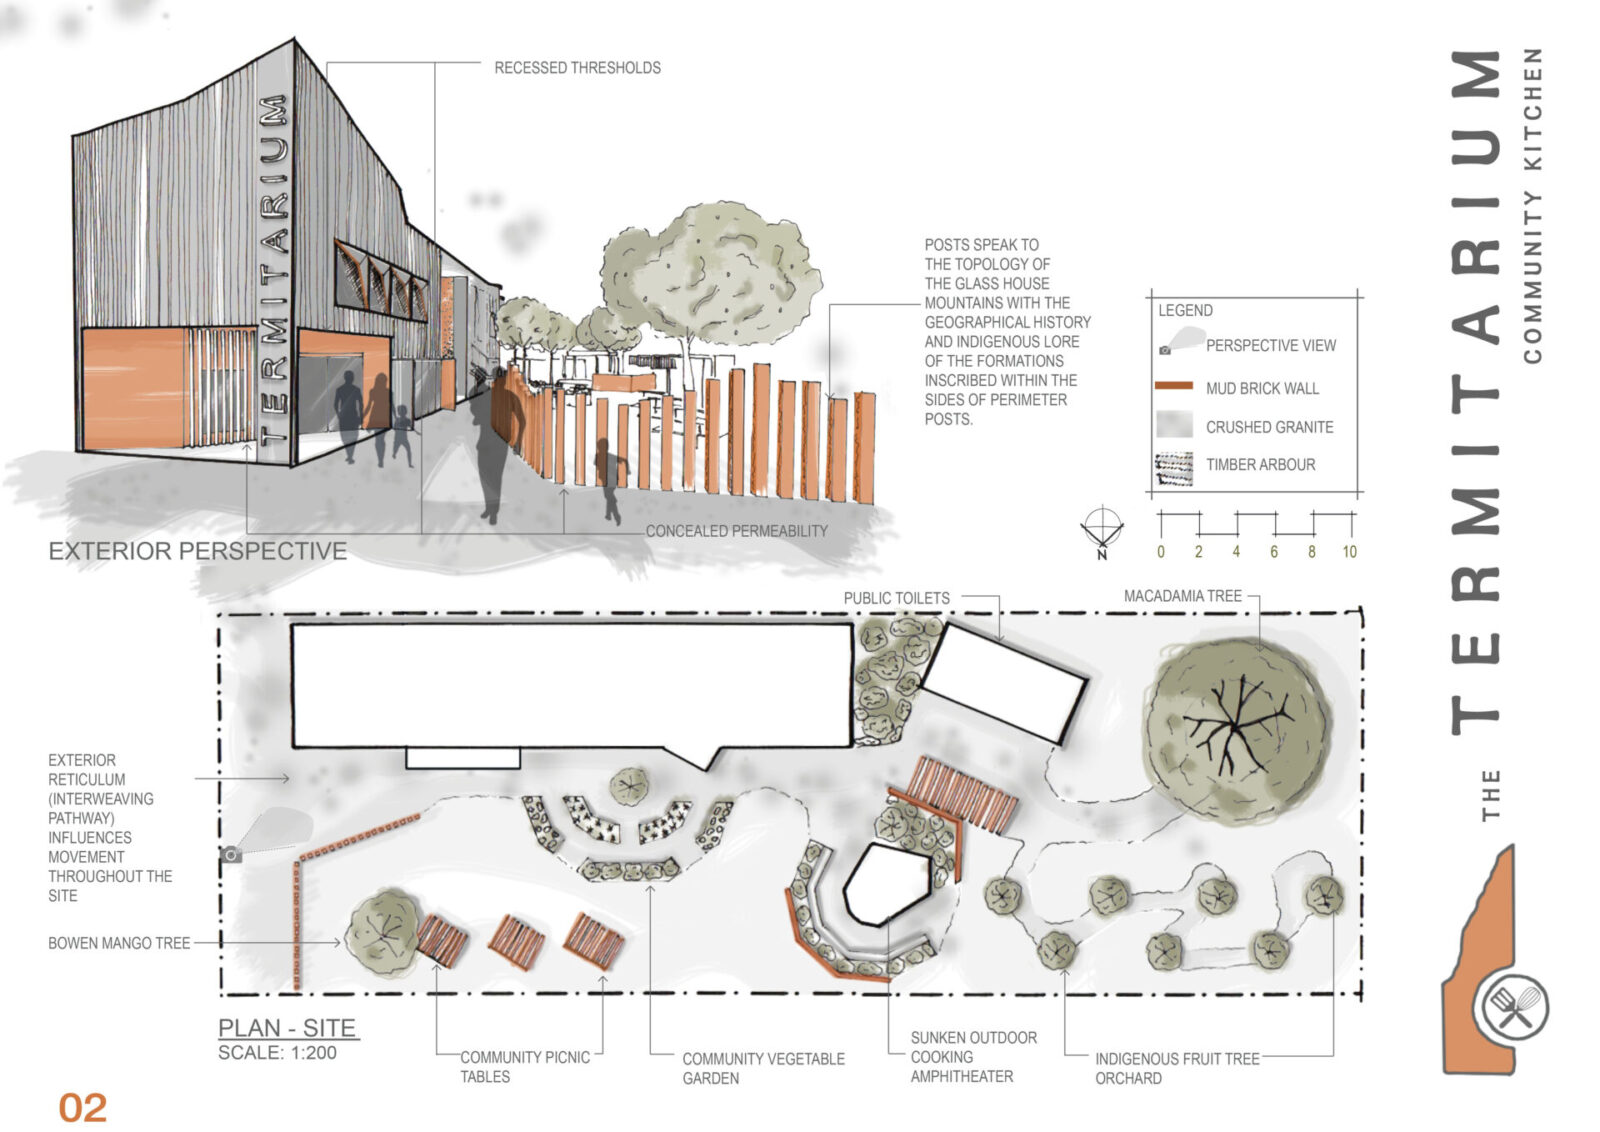 The site plan shows a exterior reticulum that influences movement throughout the site.  The site is planted with native fruit trees and a small community vegetable garden.  The exterior elevation shows the recessed thresholds across the site and for the form of the building takes its lead from the form of the termite mound